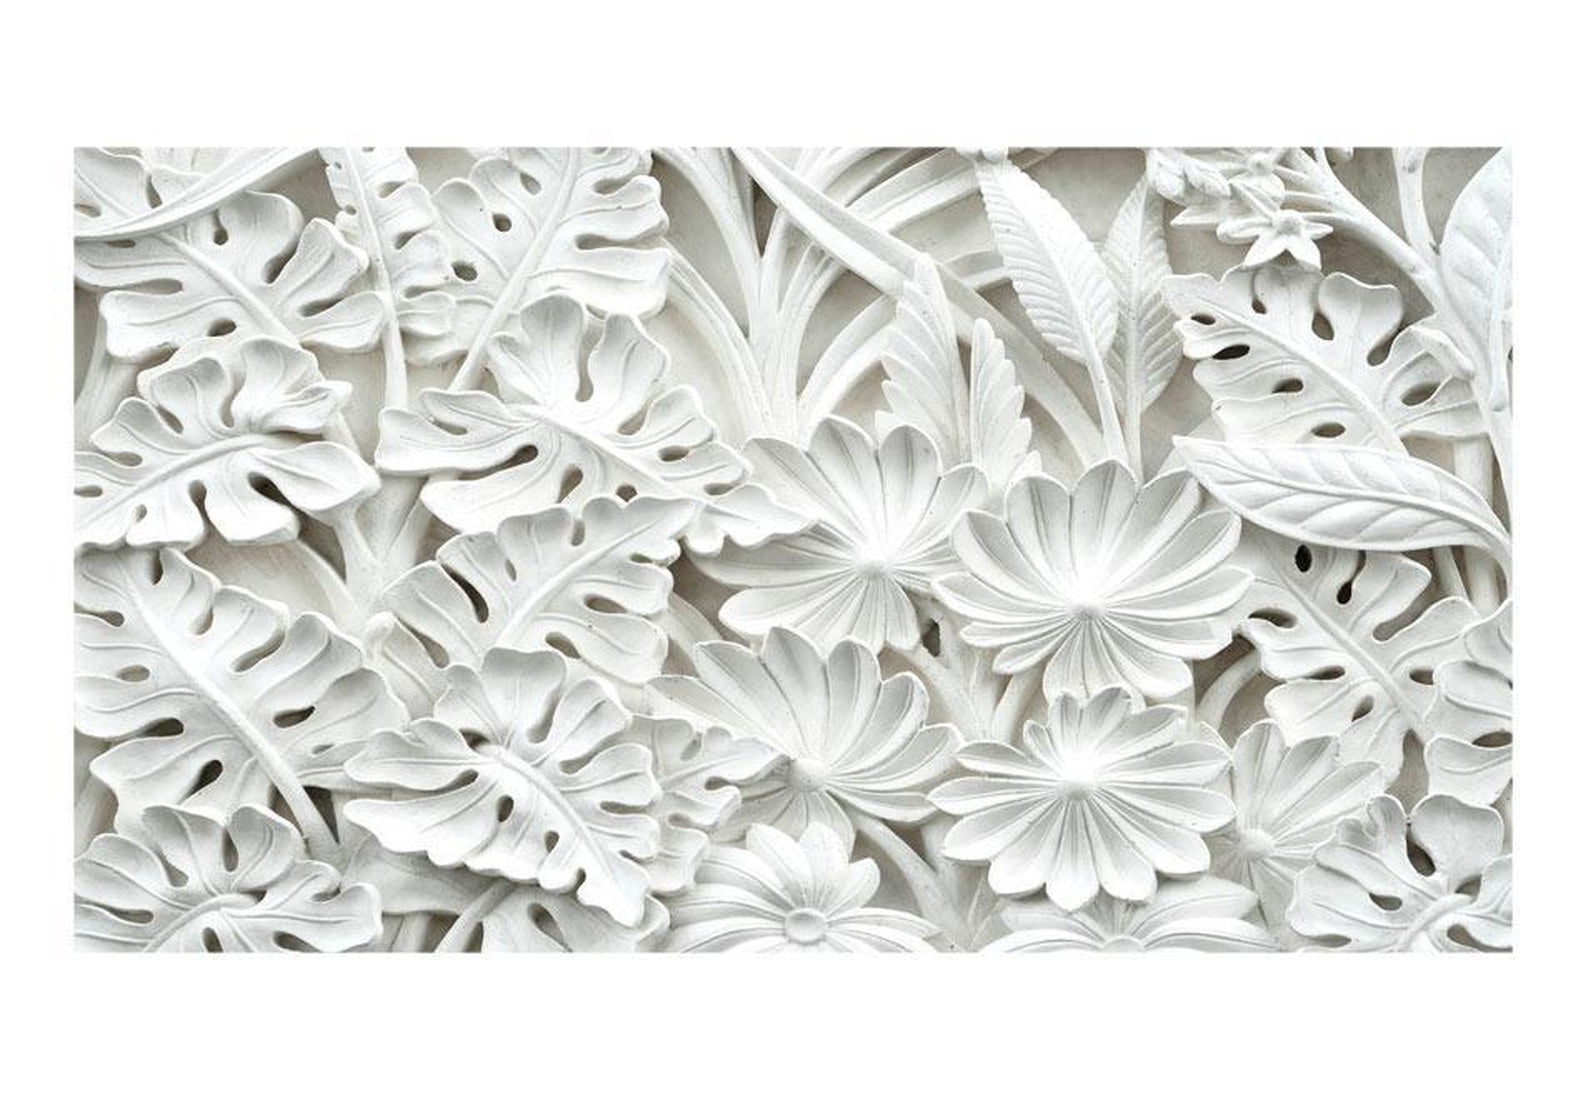 Peel & Stick Floral Wall Mural - White 3D Botanical Garden - Removable Wall Decals